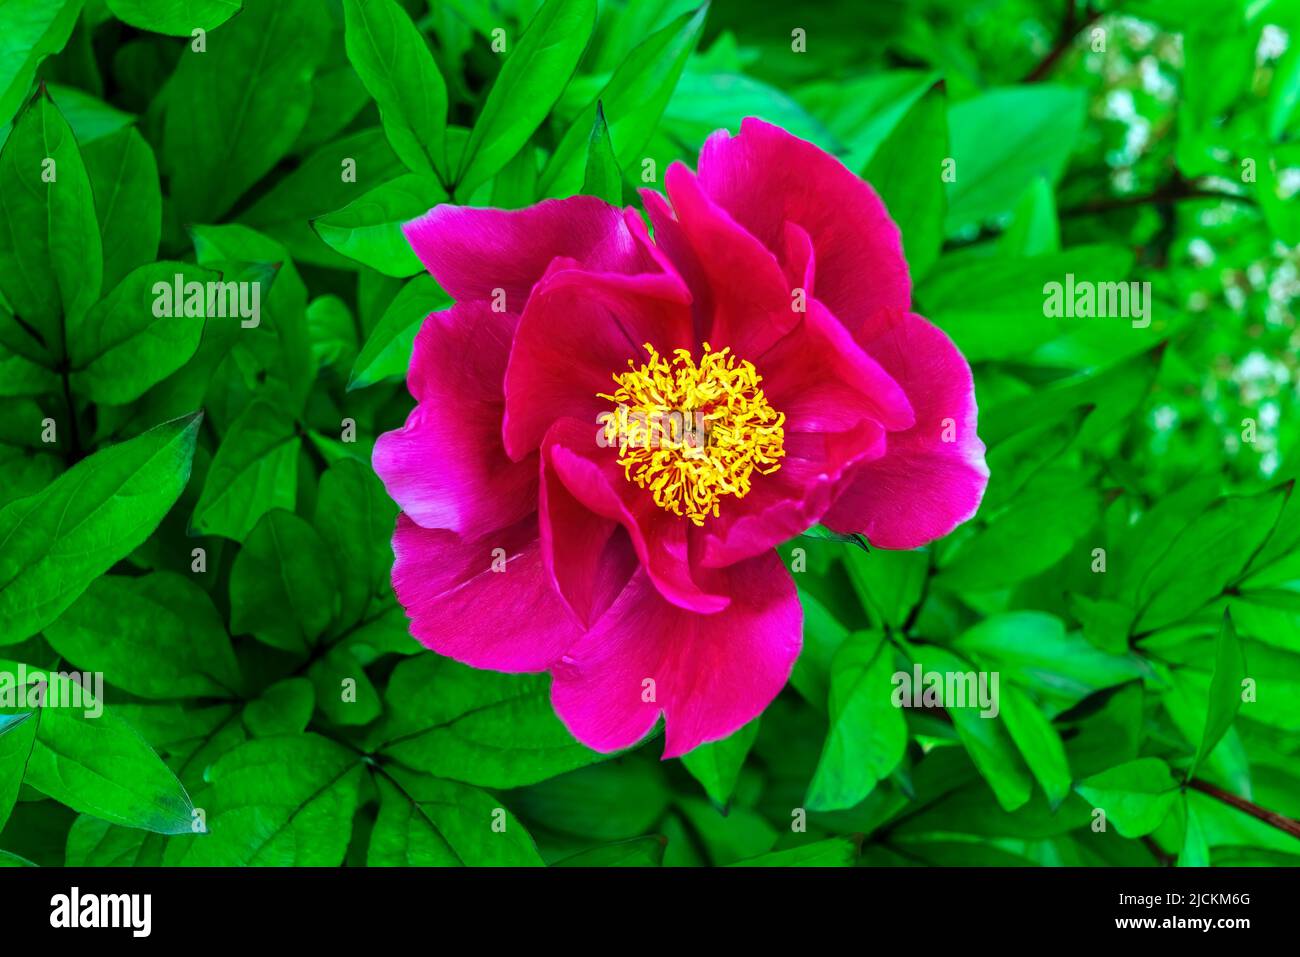 Peony 'Mistral' (paeonia) a spring summer flowering plant with a red pink springtime flower, stock photo image Stock Photo